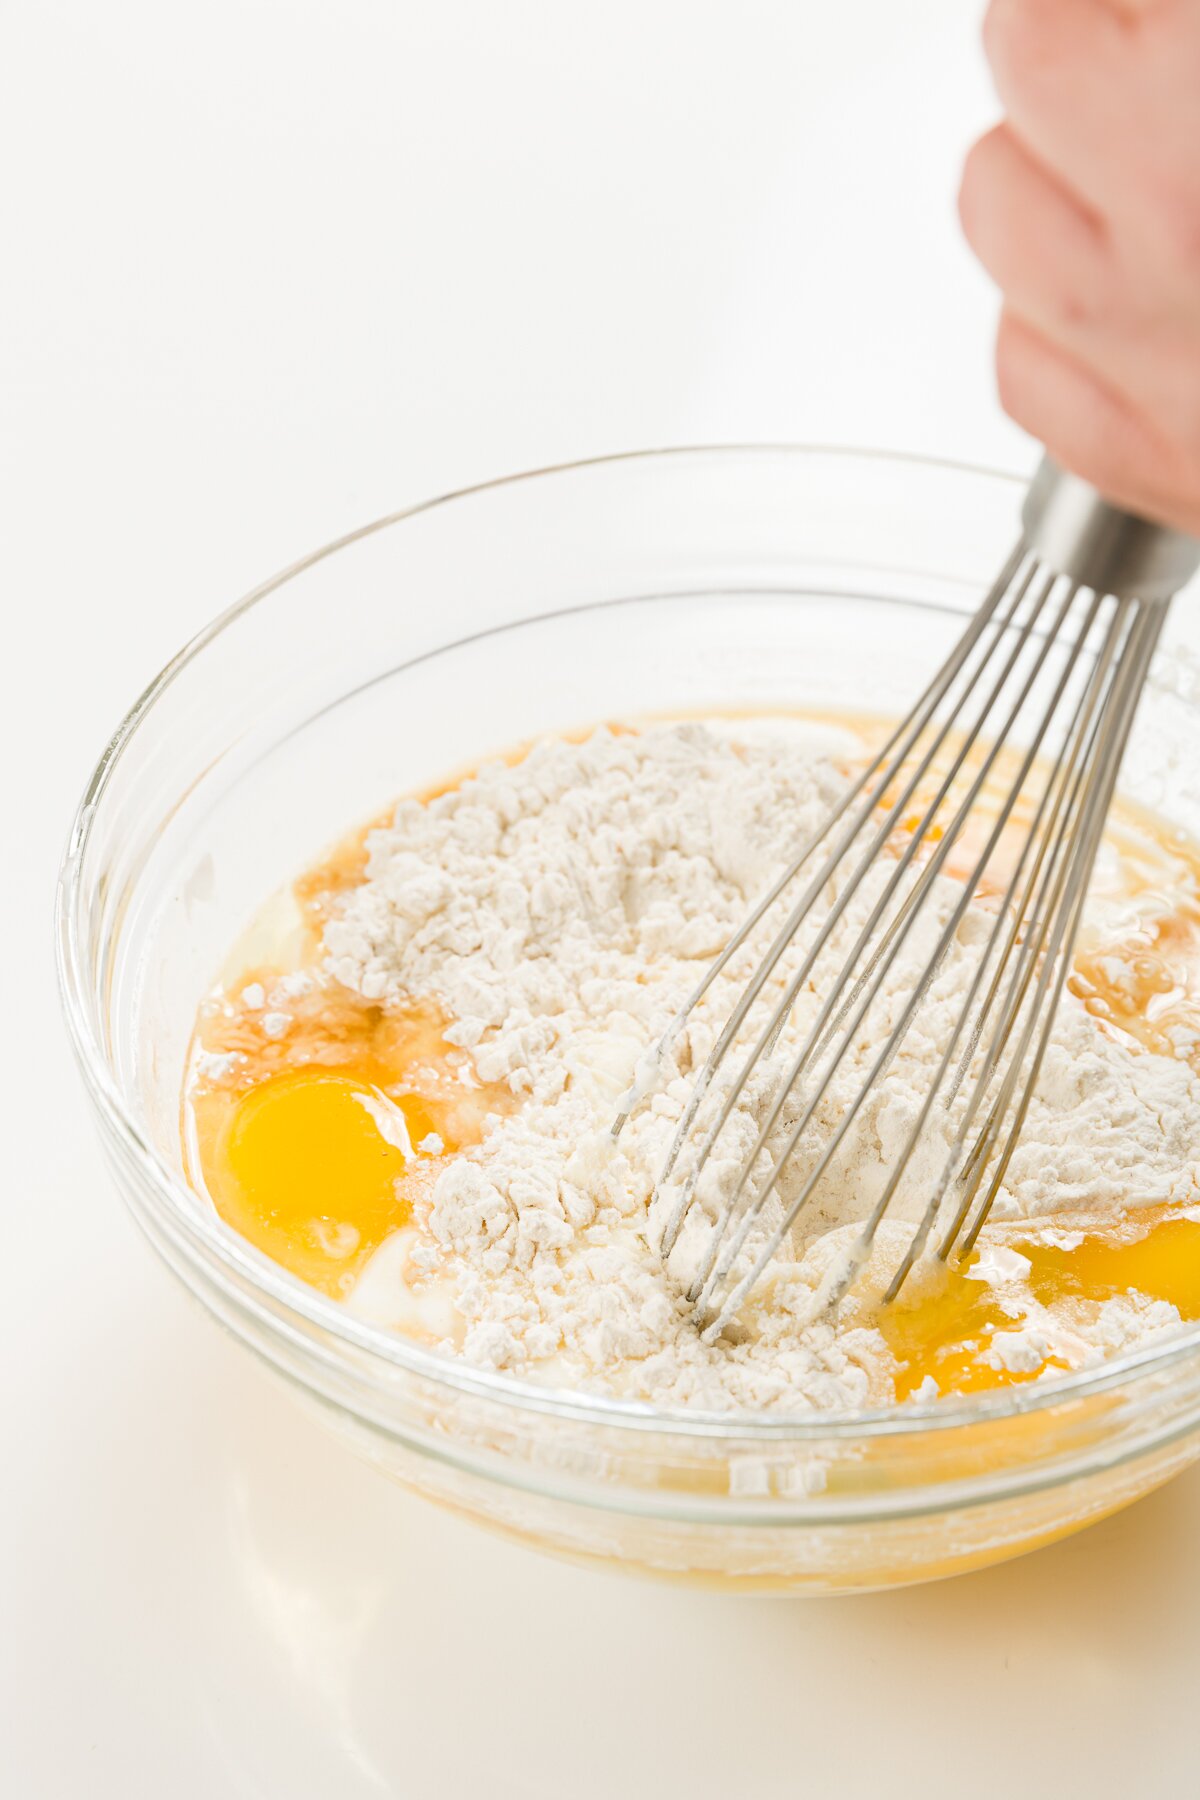 whisking eggs with other ingredients in a small glass bowl